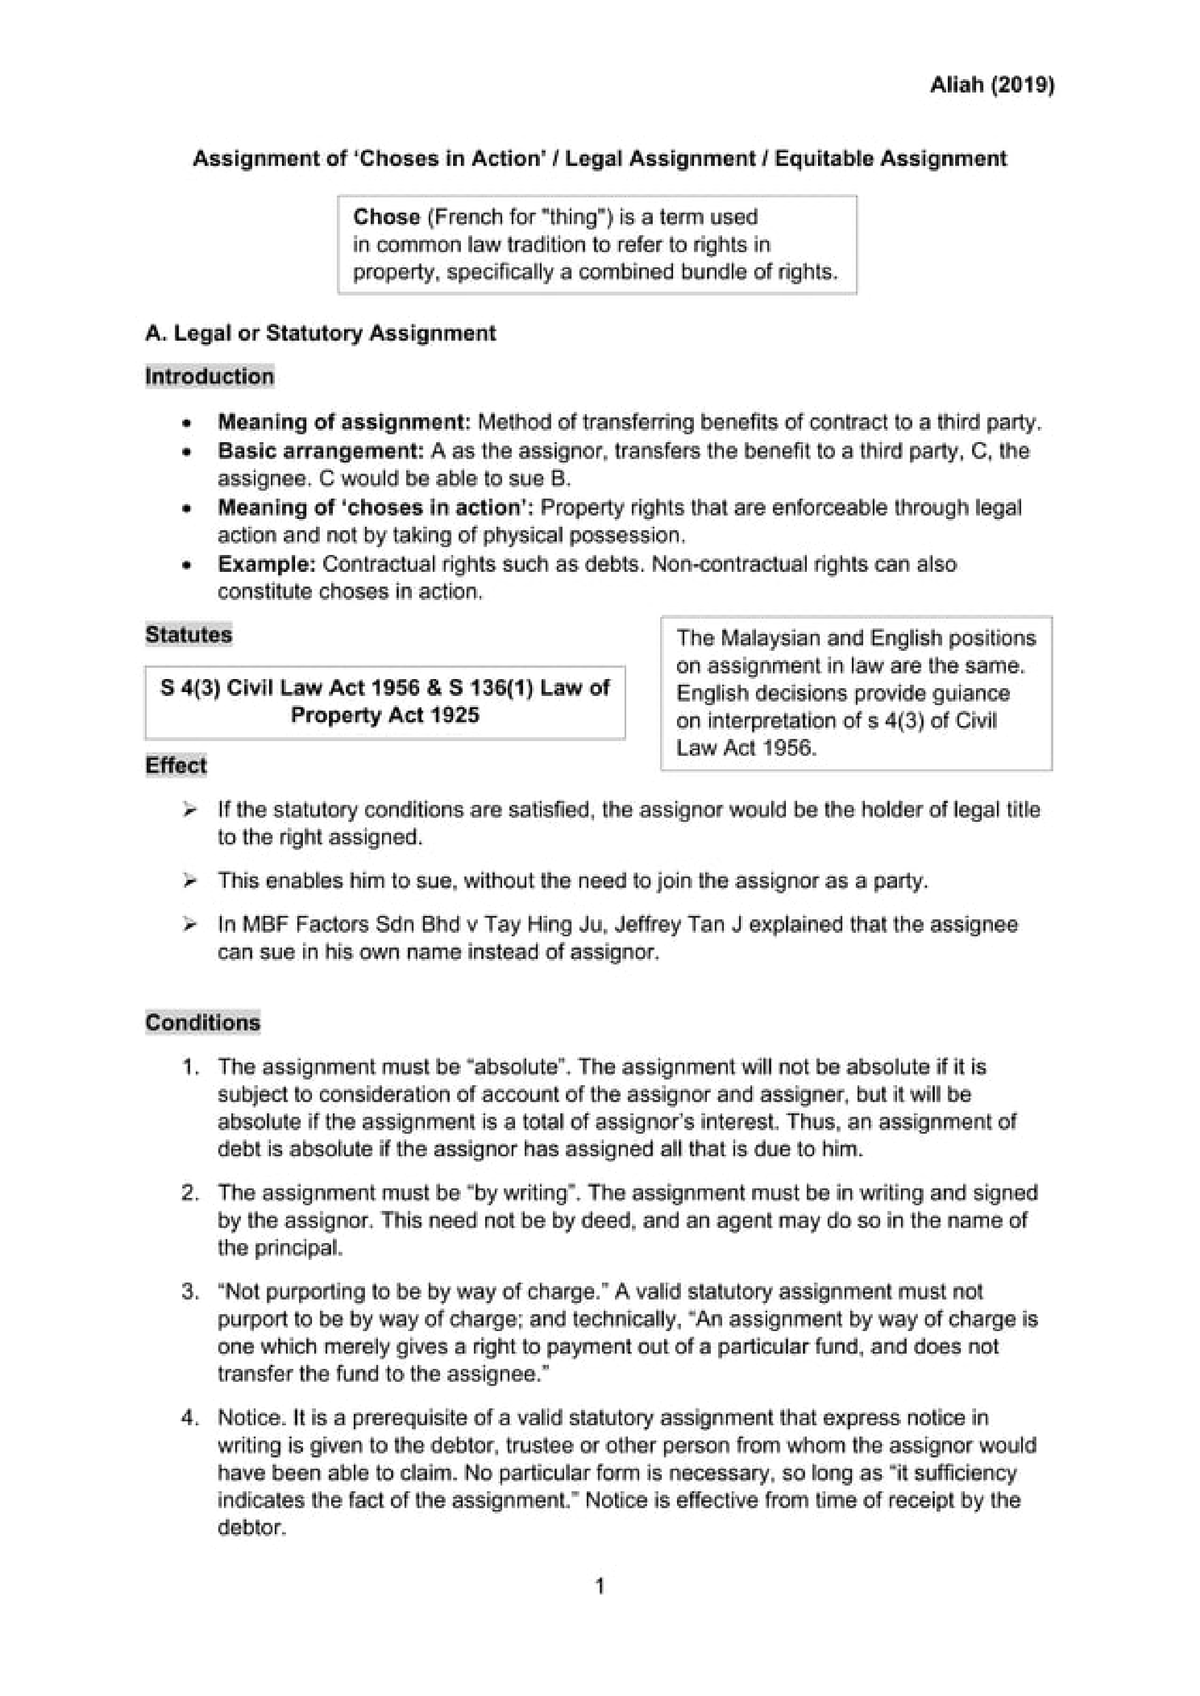 equitable and legal assignment